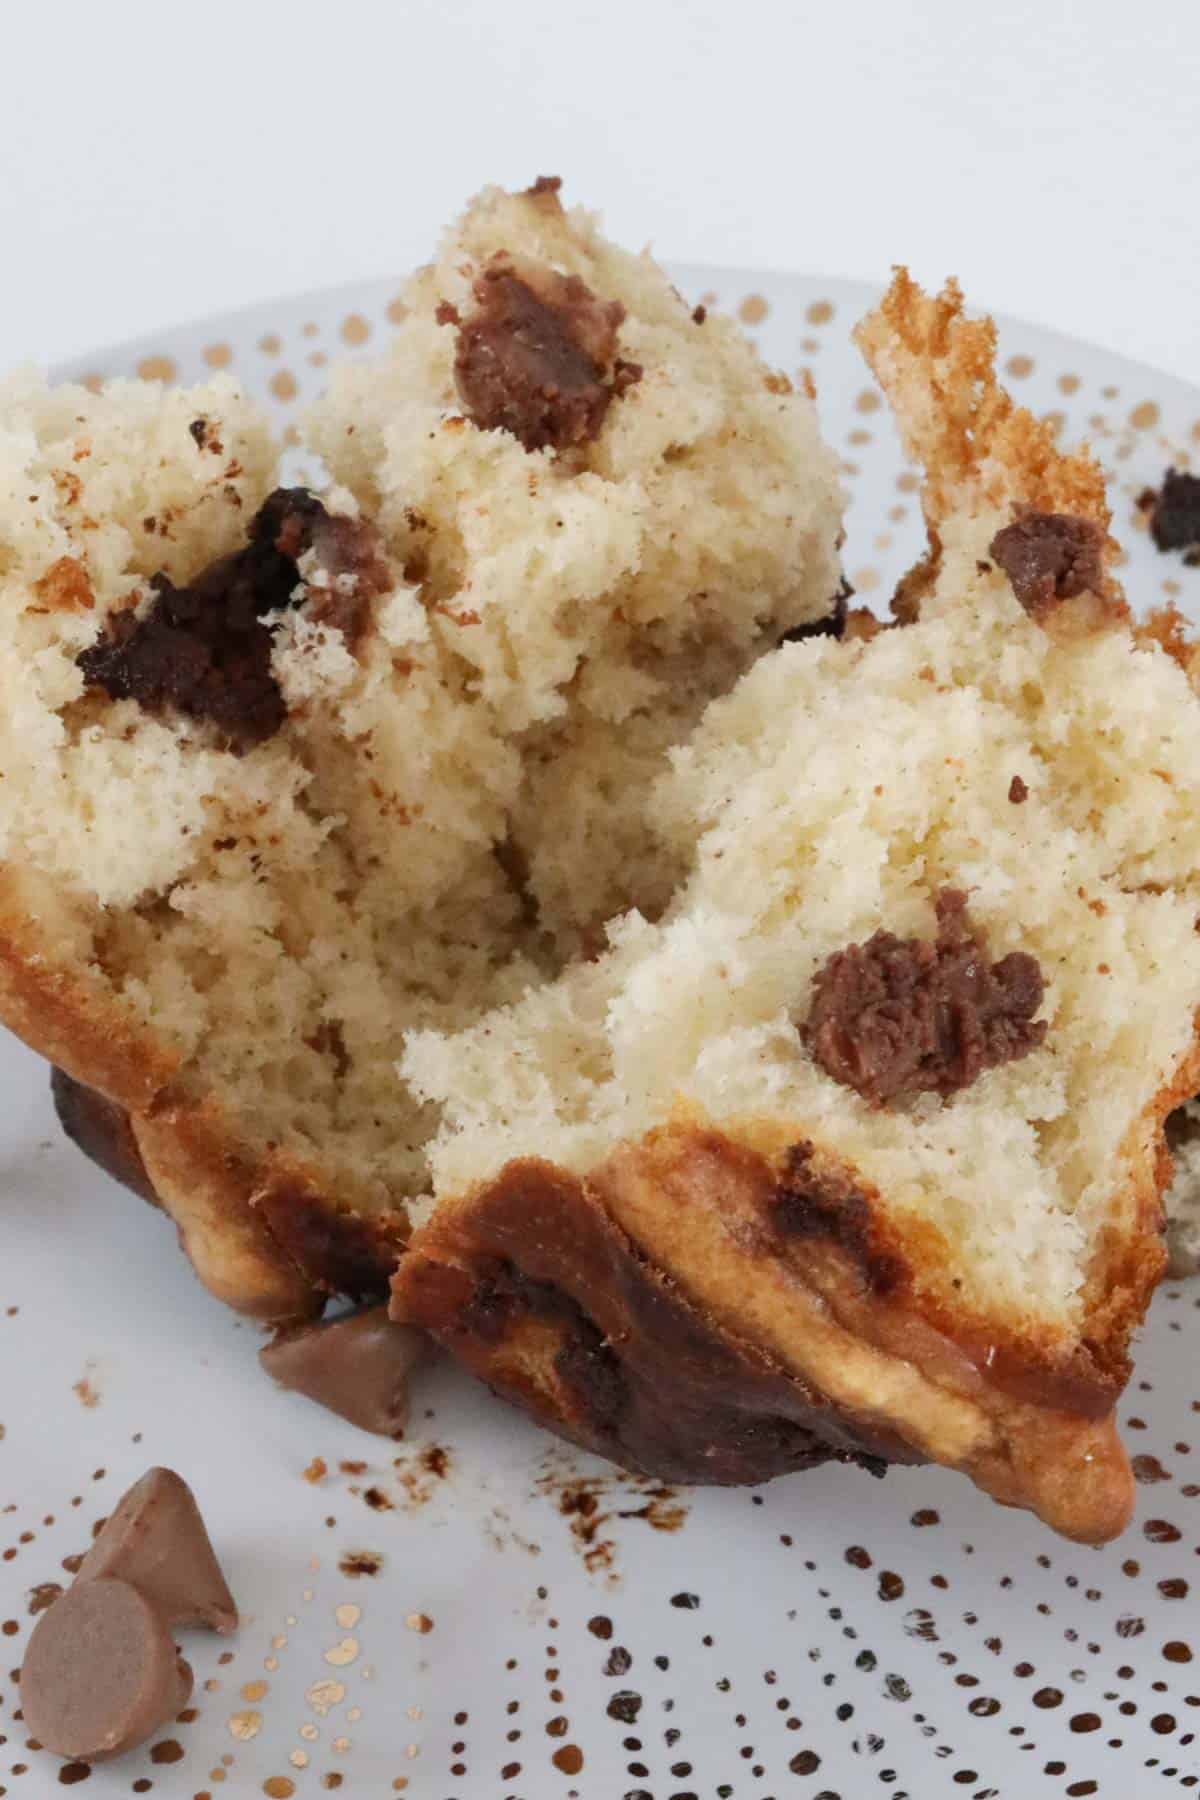 A fluffy sweet bread roll with chocolate chips split in half.